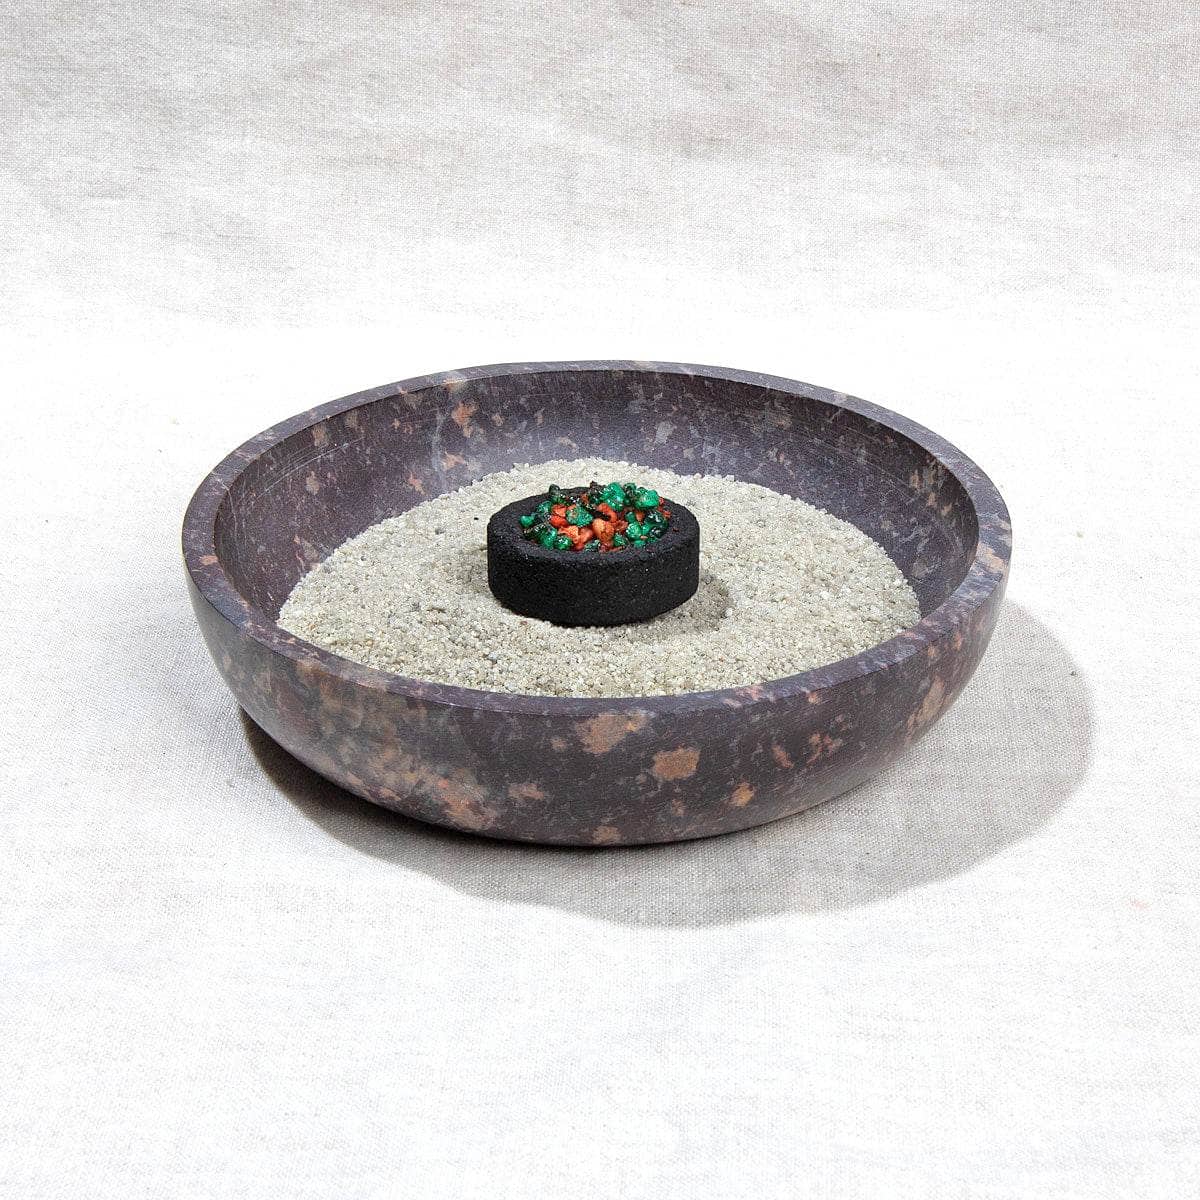  Natural Soapstone Smudge Bowl Kit by Tiny Rituals Tiny Rituals Perfumarie